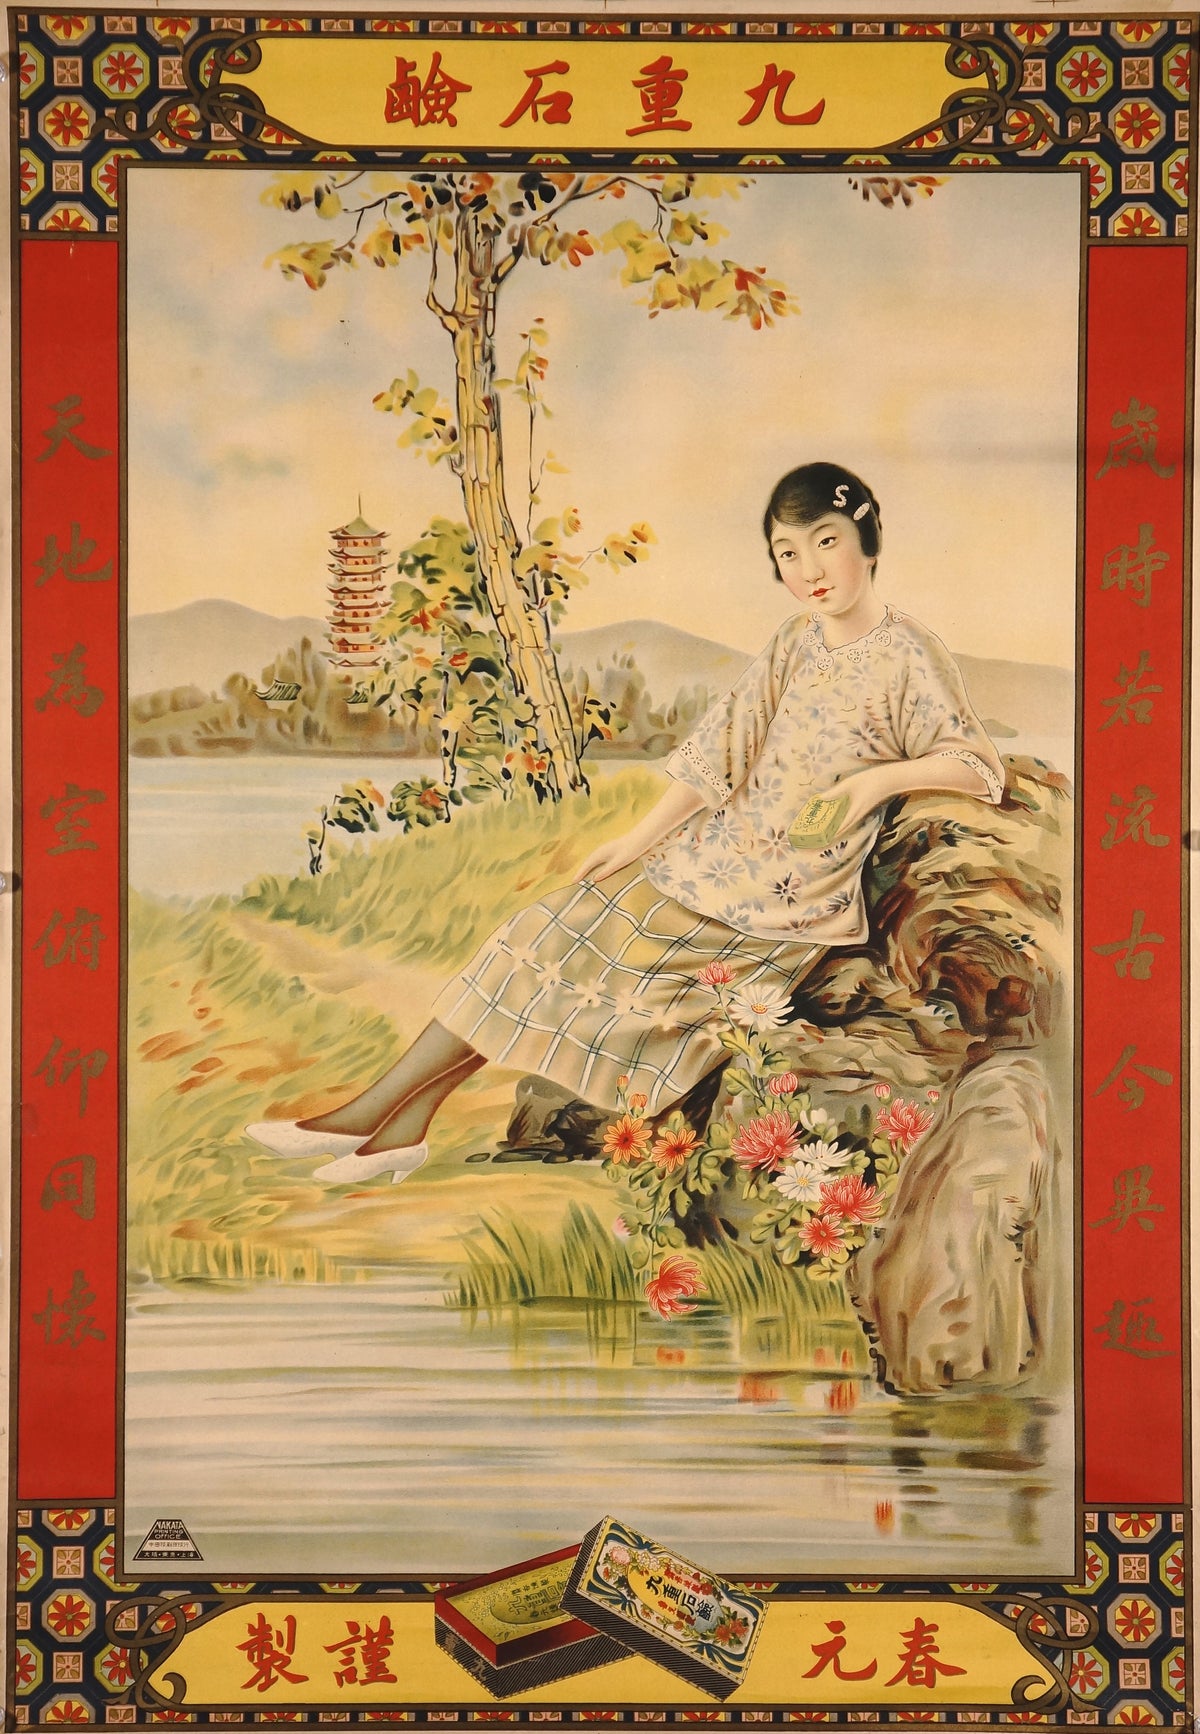 Chinese Soap ad - Authentic Vintage Poster